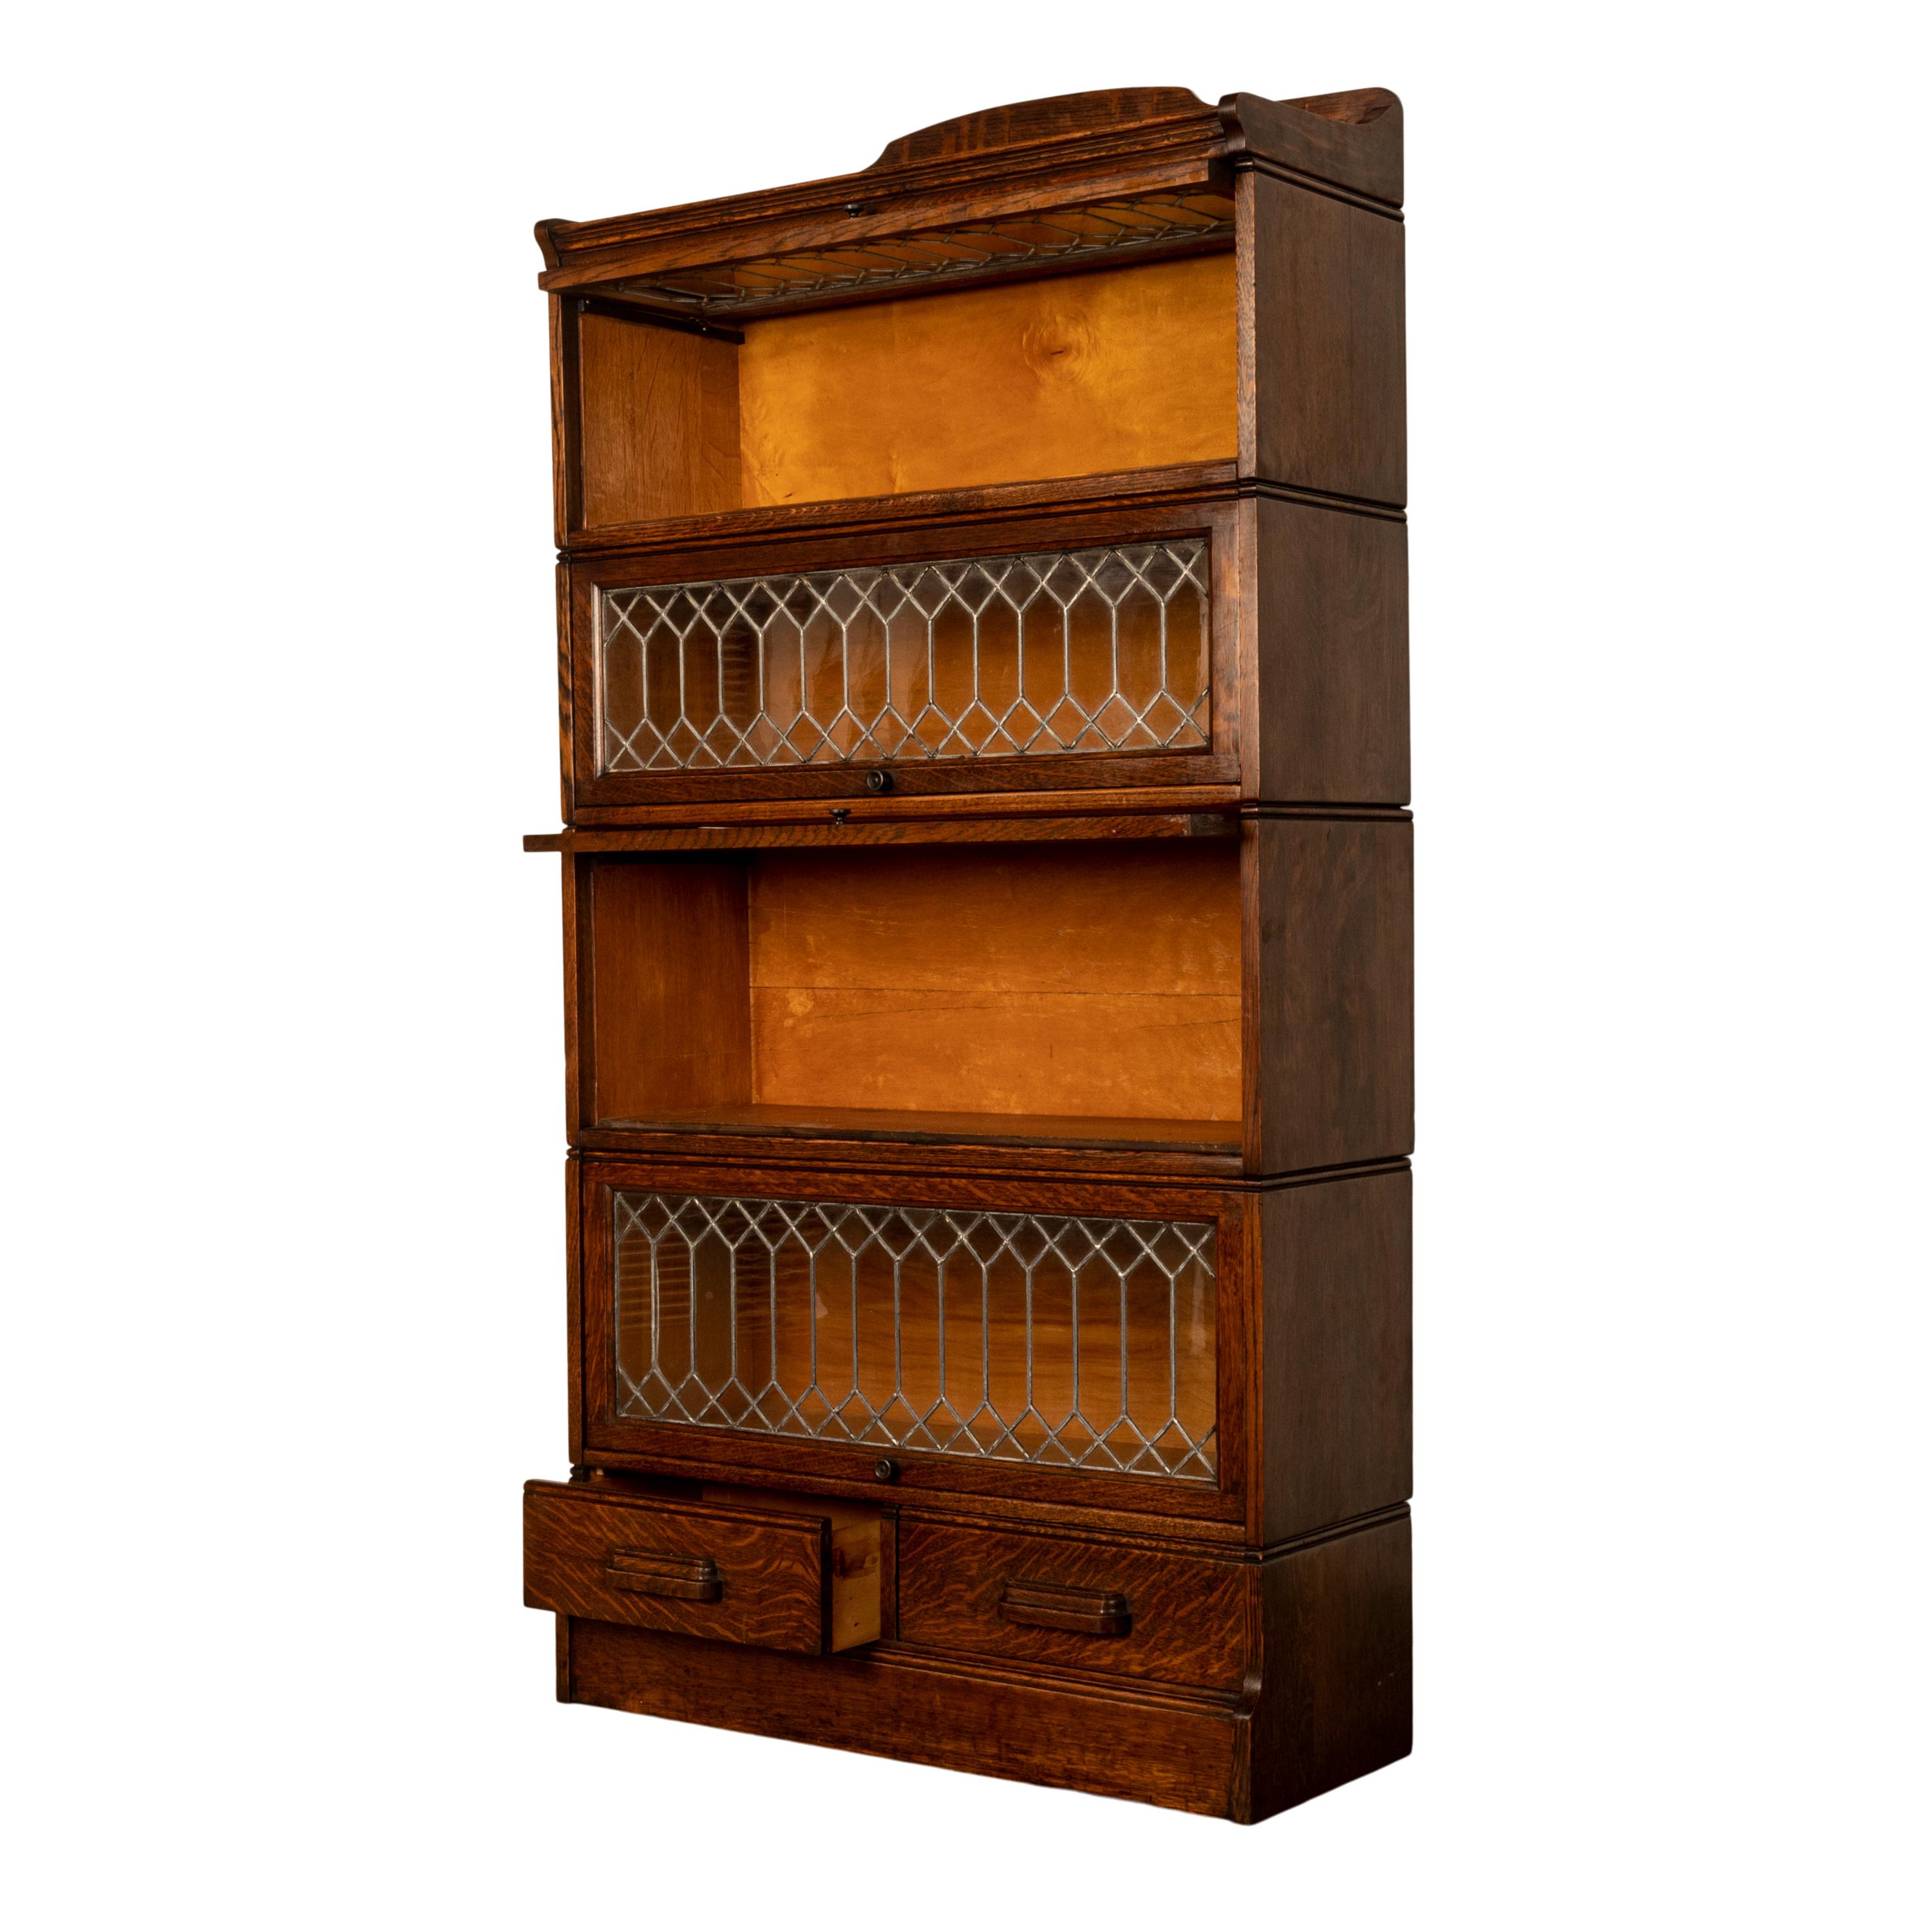 Early 20th Century Antique American Mission Arts & Crafts Stacking Leaded Glass Lawyer's Bookcase 